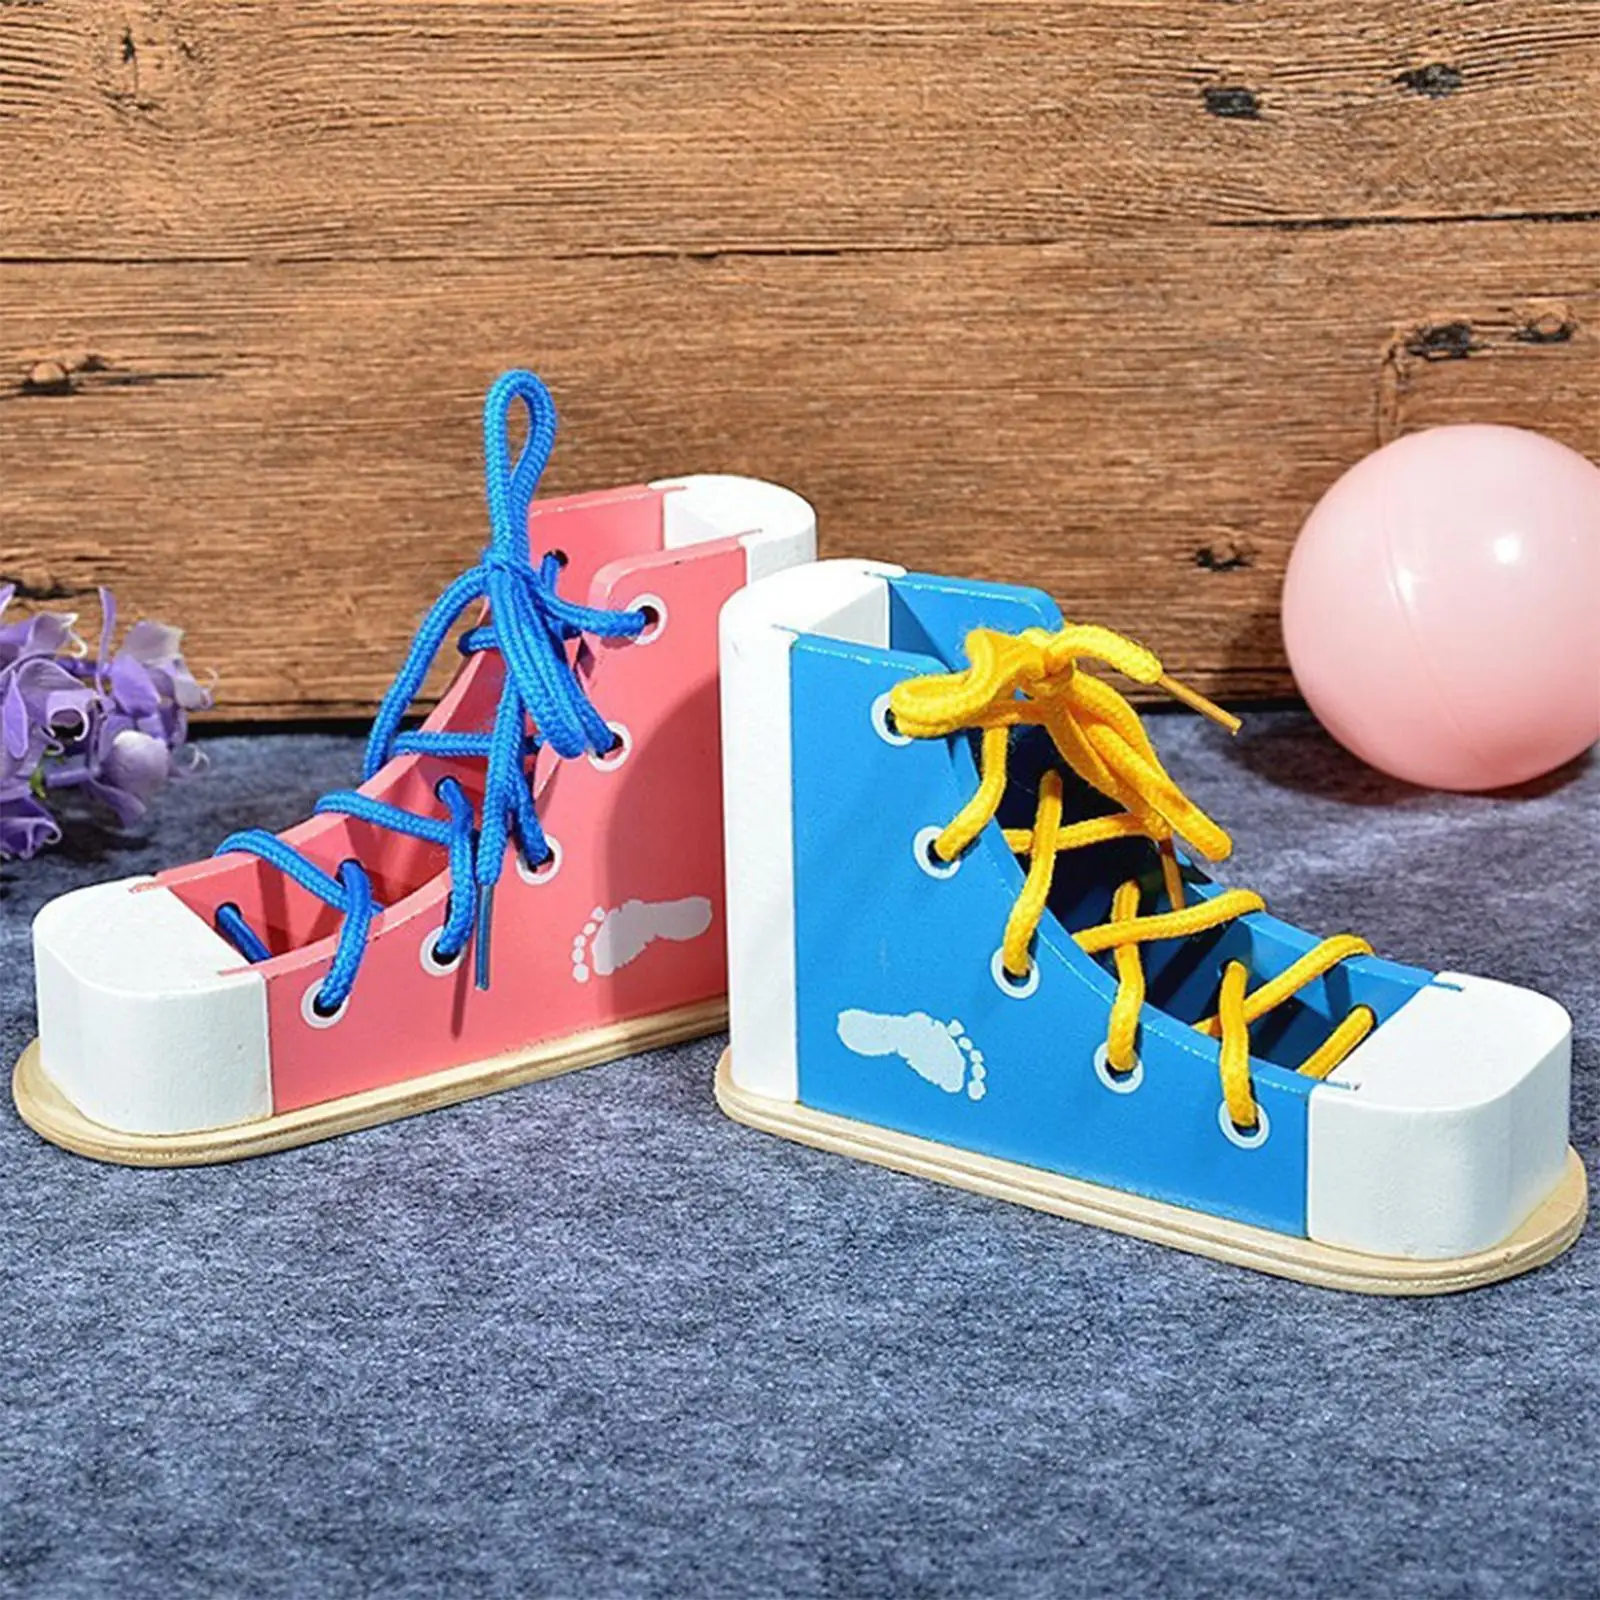 Learn to Tie Shoes Fine Motor Skills Toy Shoe Tying Aid Wooden Lacing Shoe Toy for Toddler